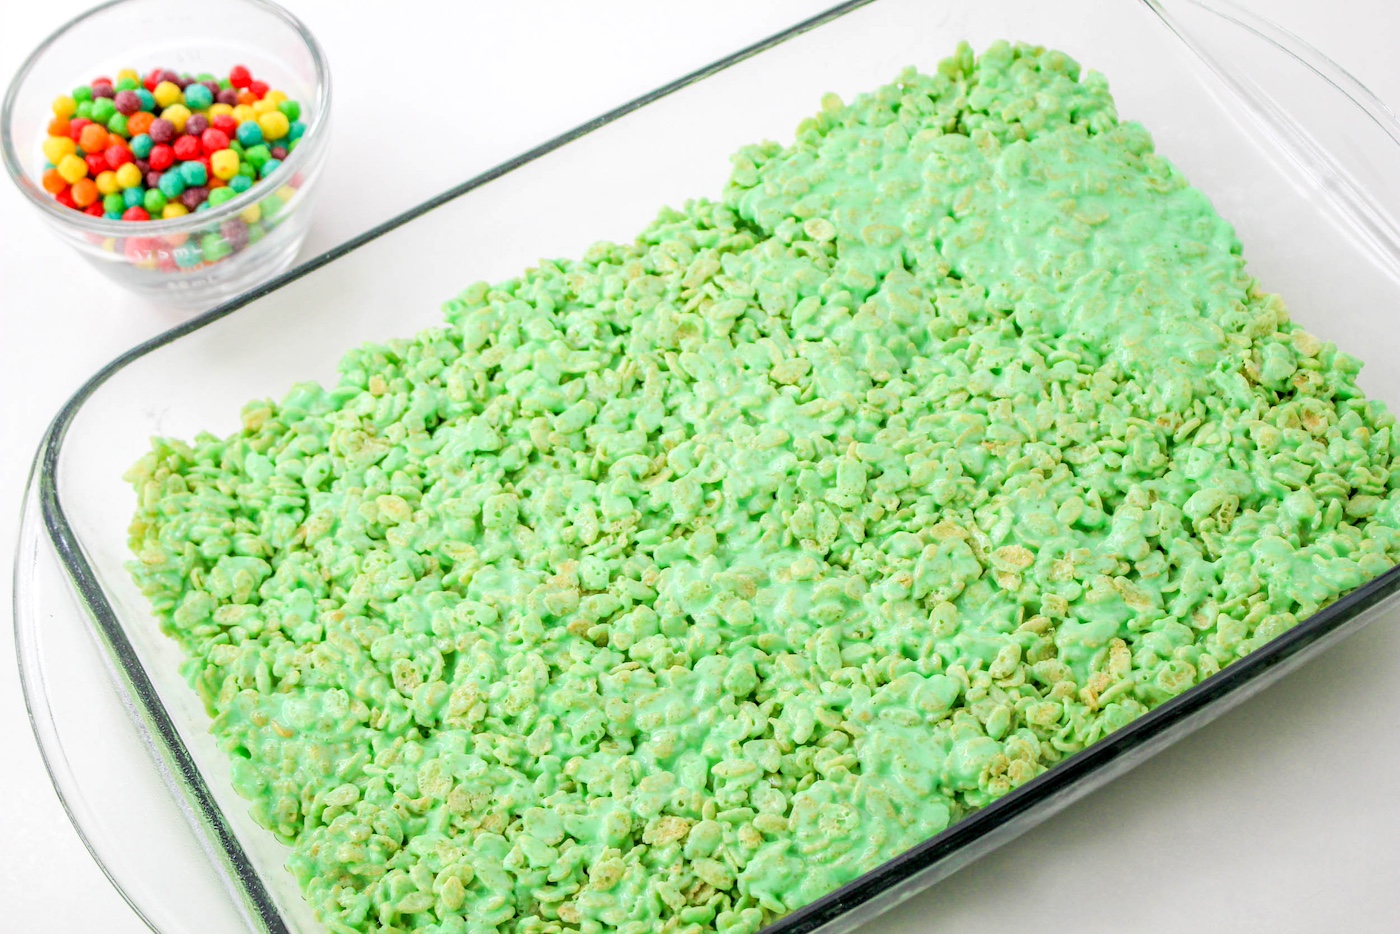 Green rice krispie treats pressed into a pan